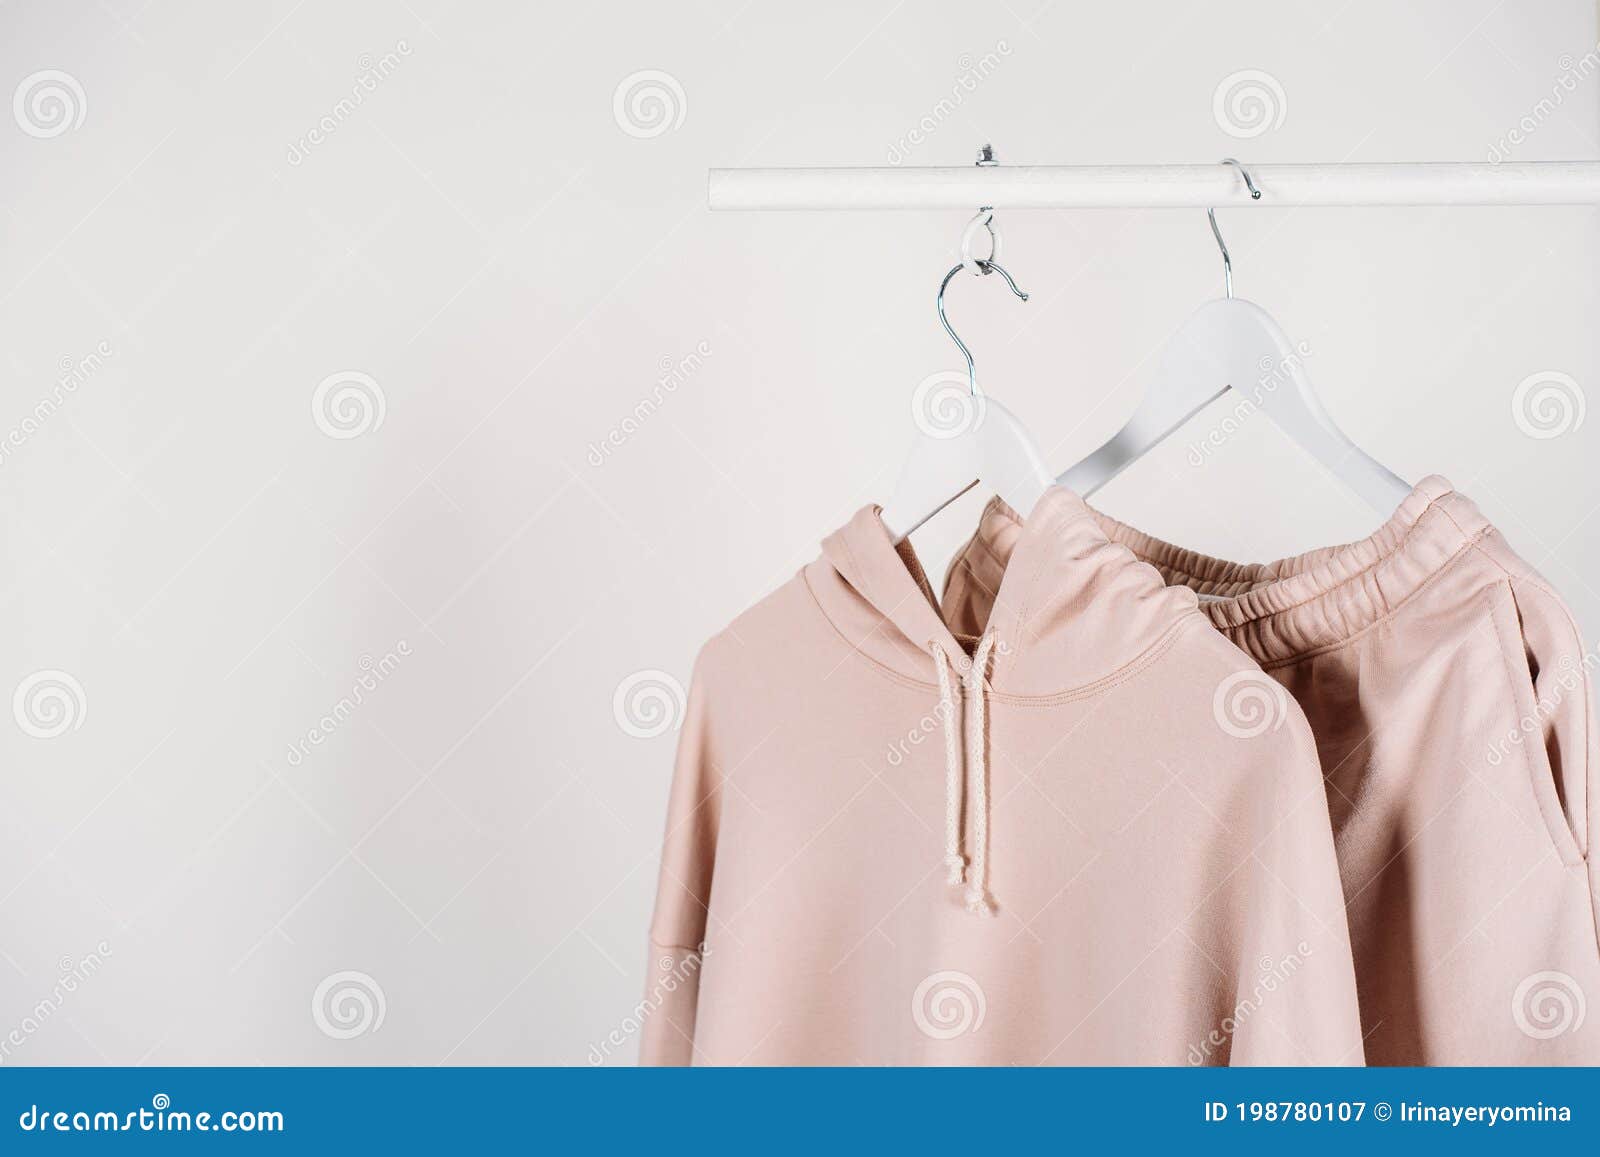 work from home outfit, casual wardrobe, wfh wear, comfy style background with sport wear outfit